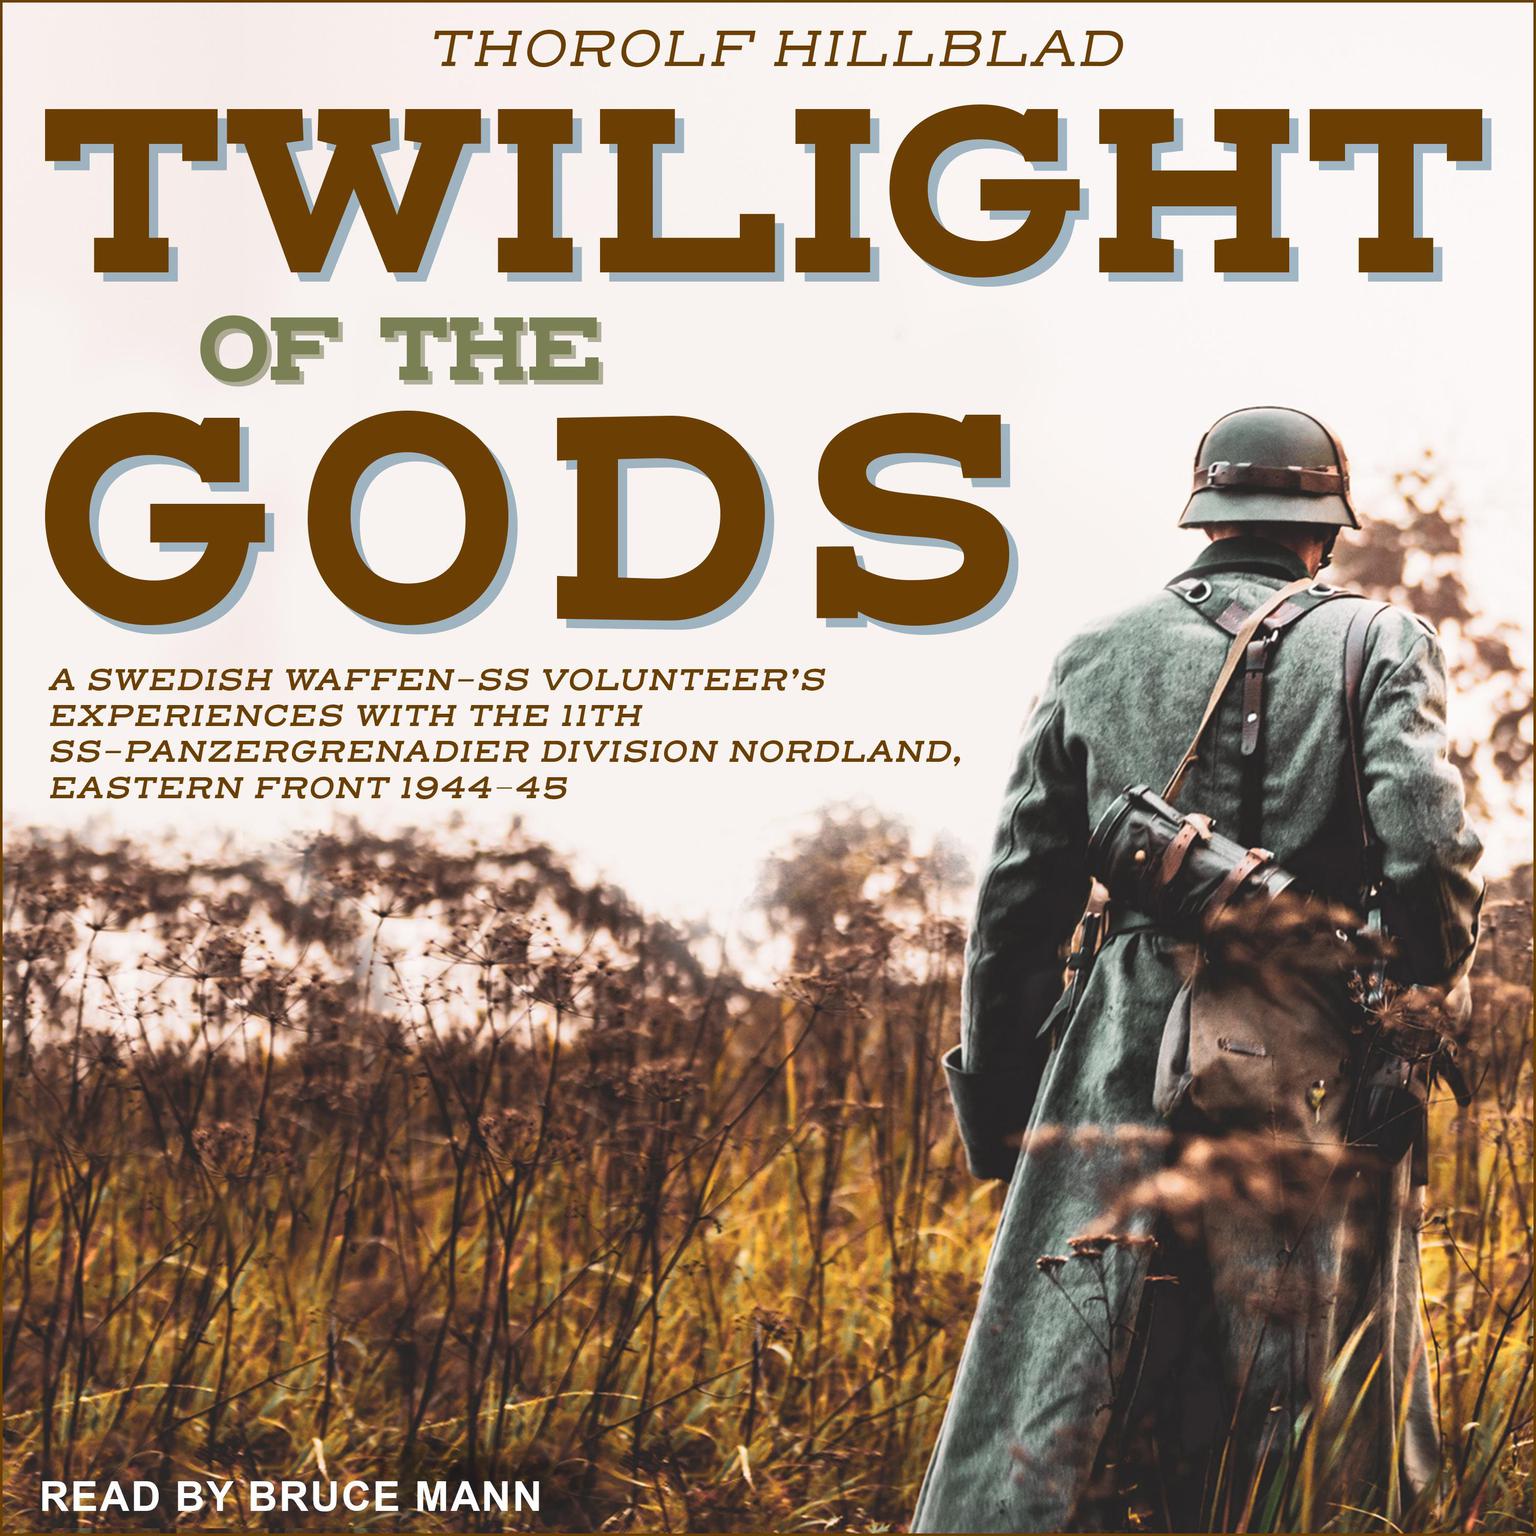 Twilight of the Gods: A Swedish Waffen-SS Volunteers Experiences with the 11th SS-Panzergrenadier Division Nordland, Eastern Front 1944-45 Audiobook, by Erik Wallin